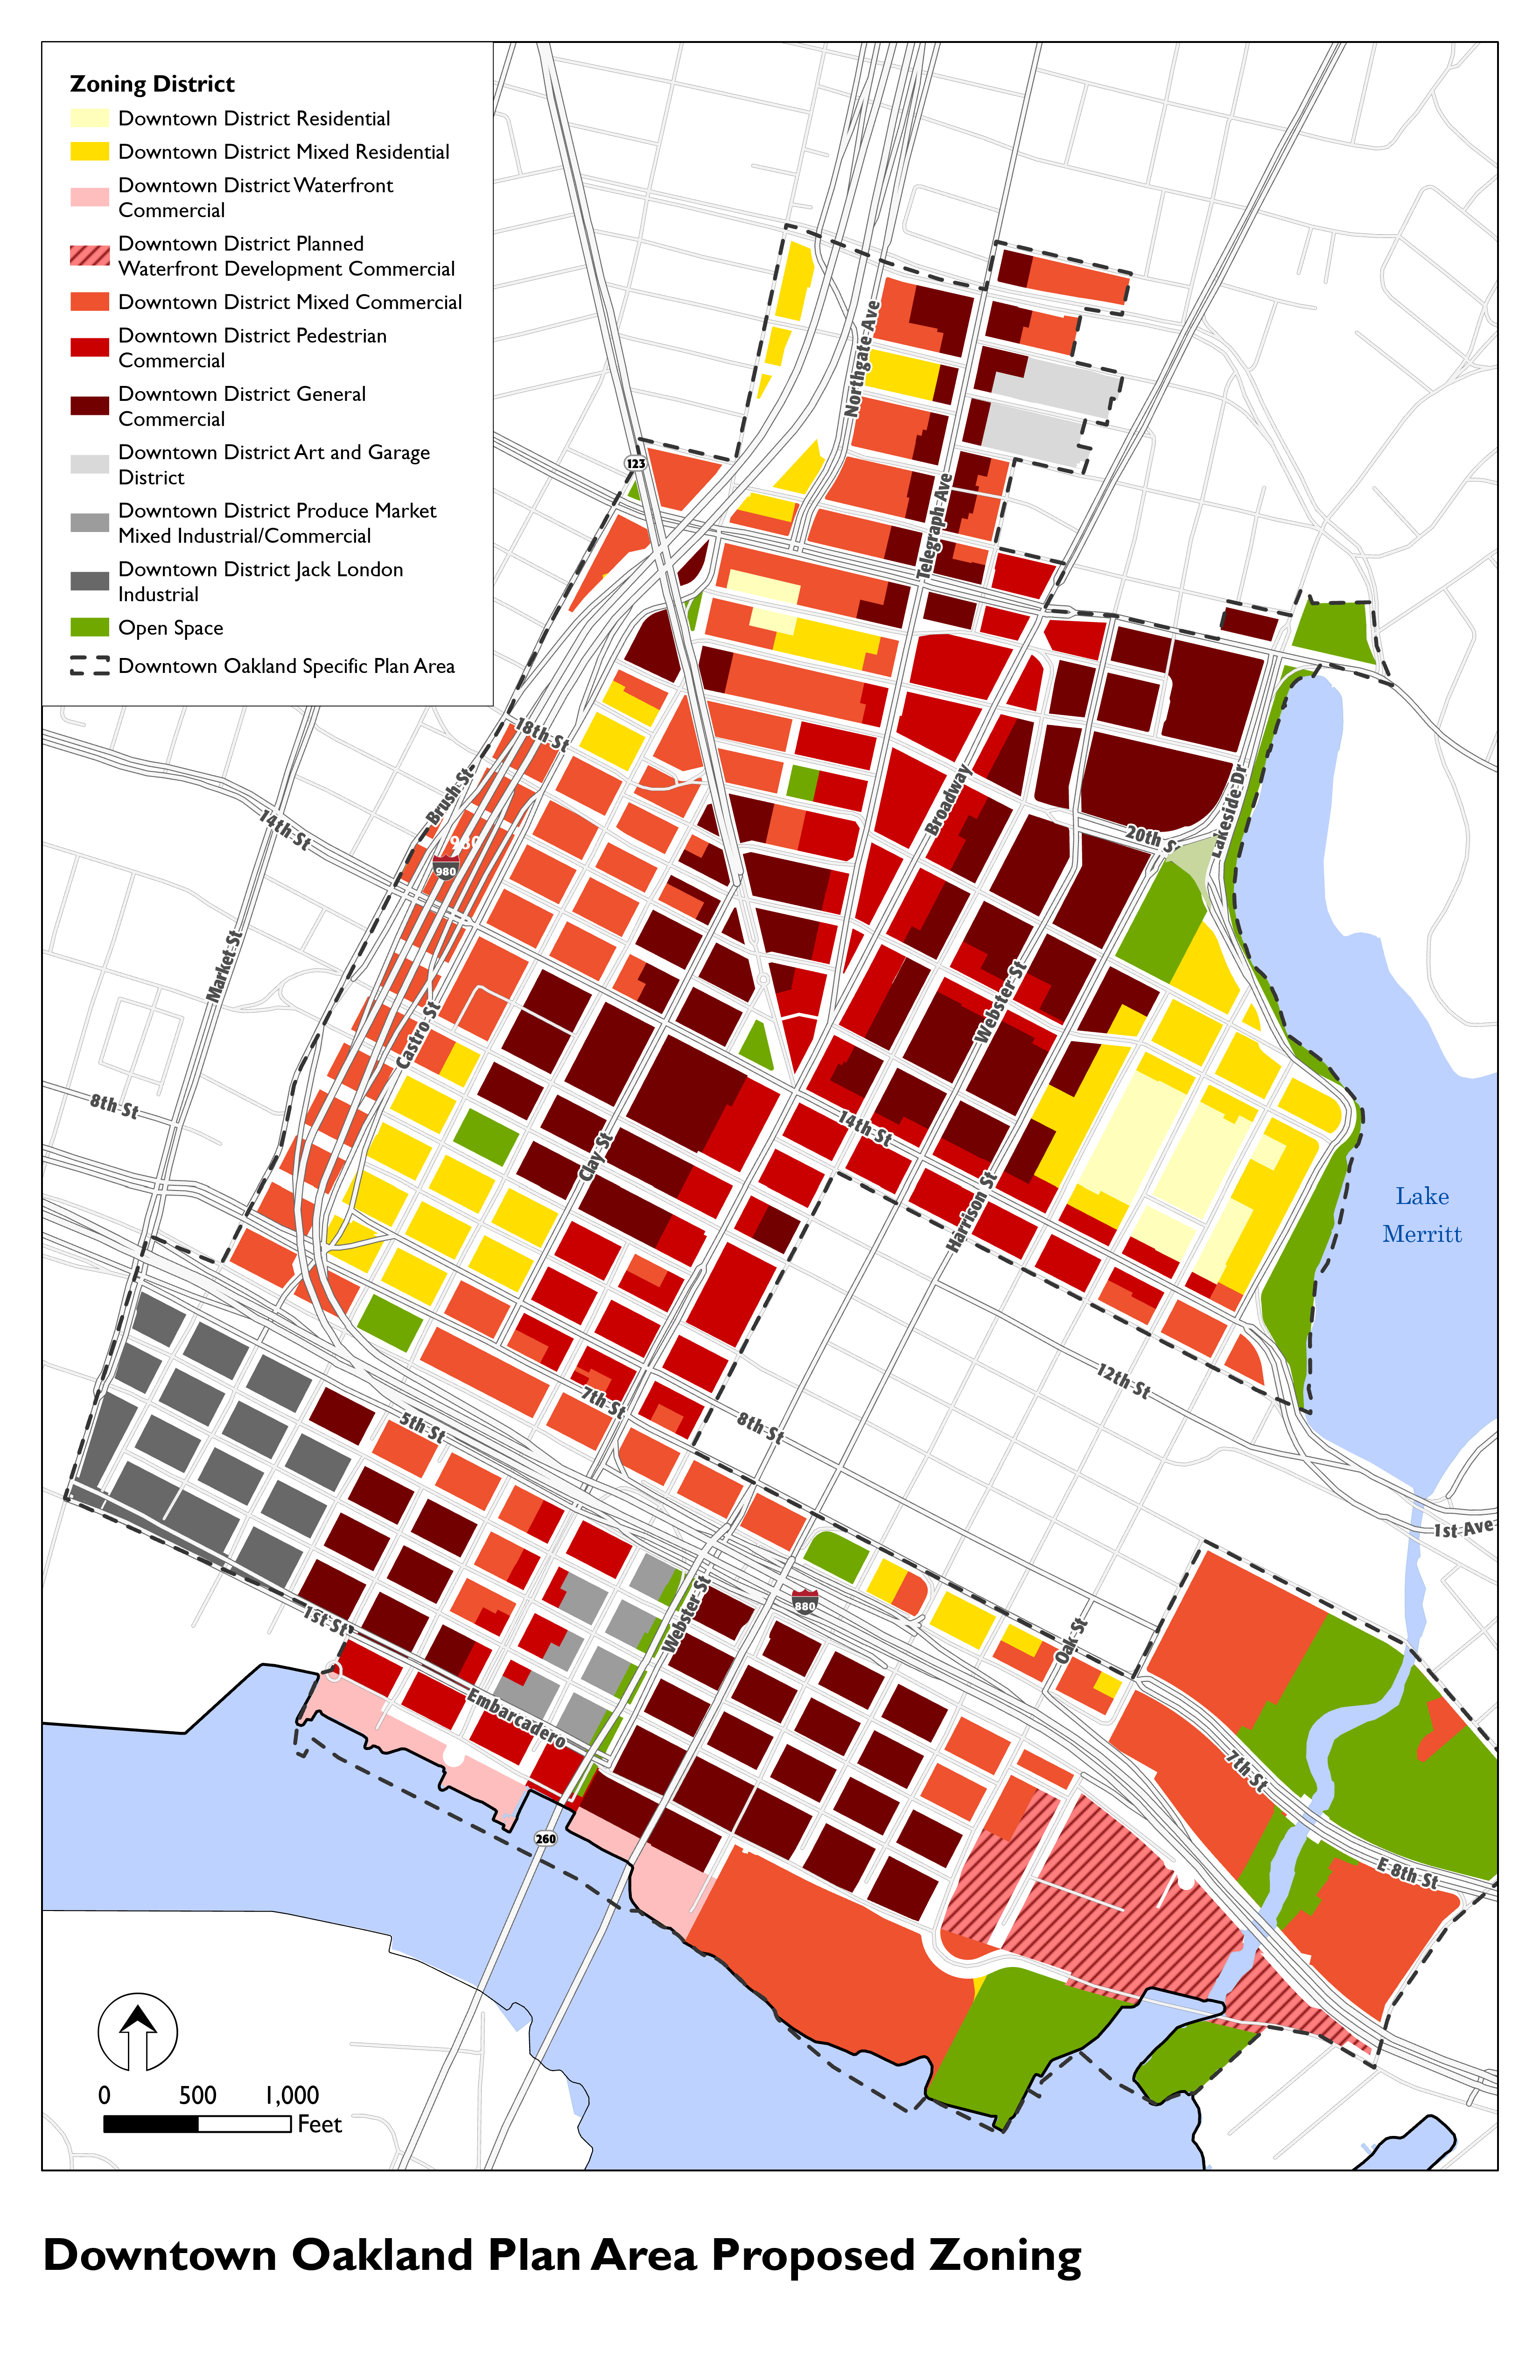 Downtown Oakland Zoning Map showing different zones in downtown area